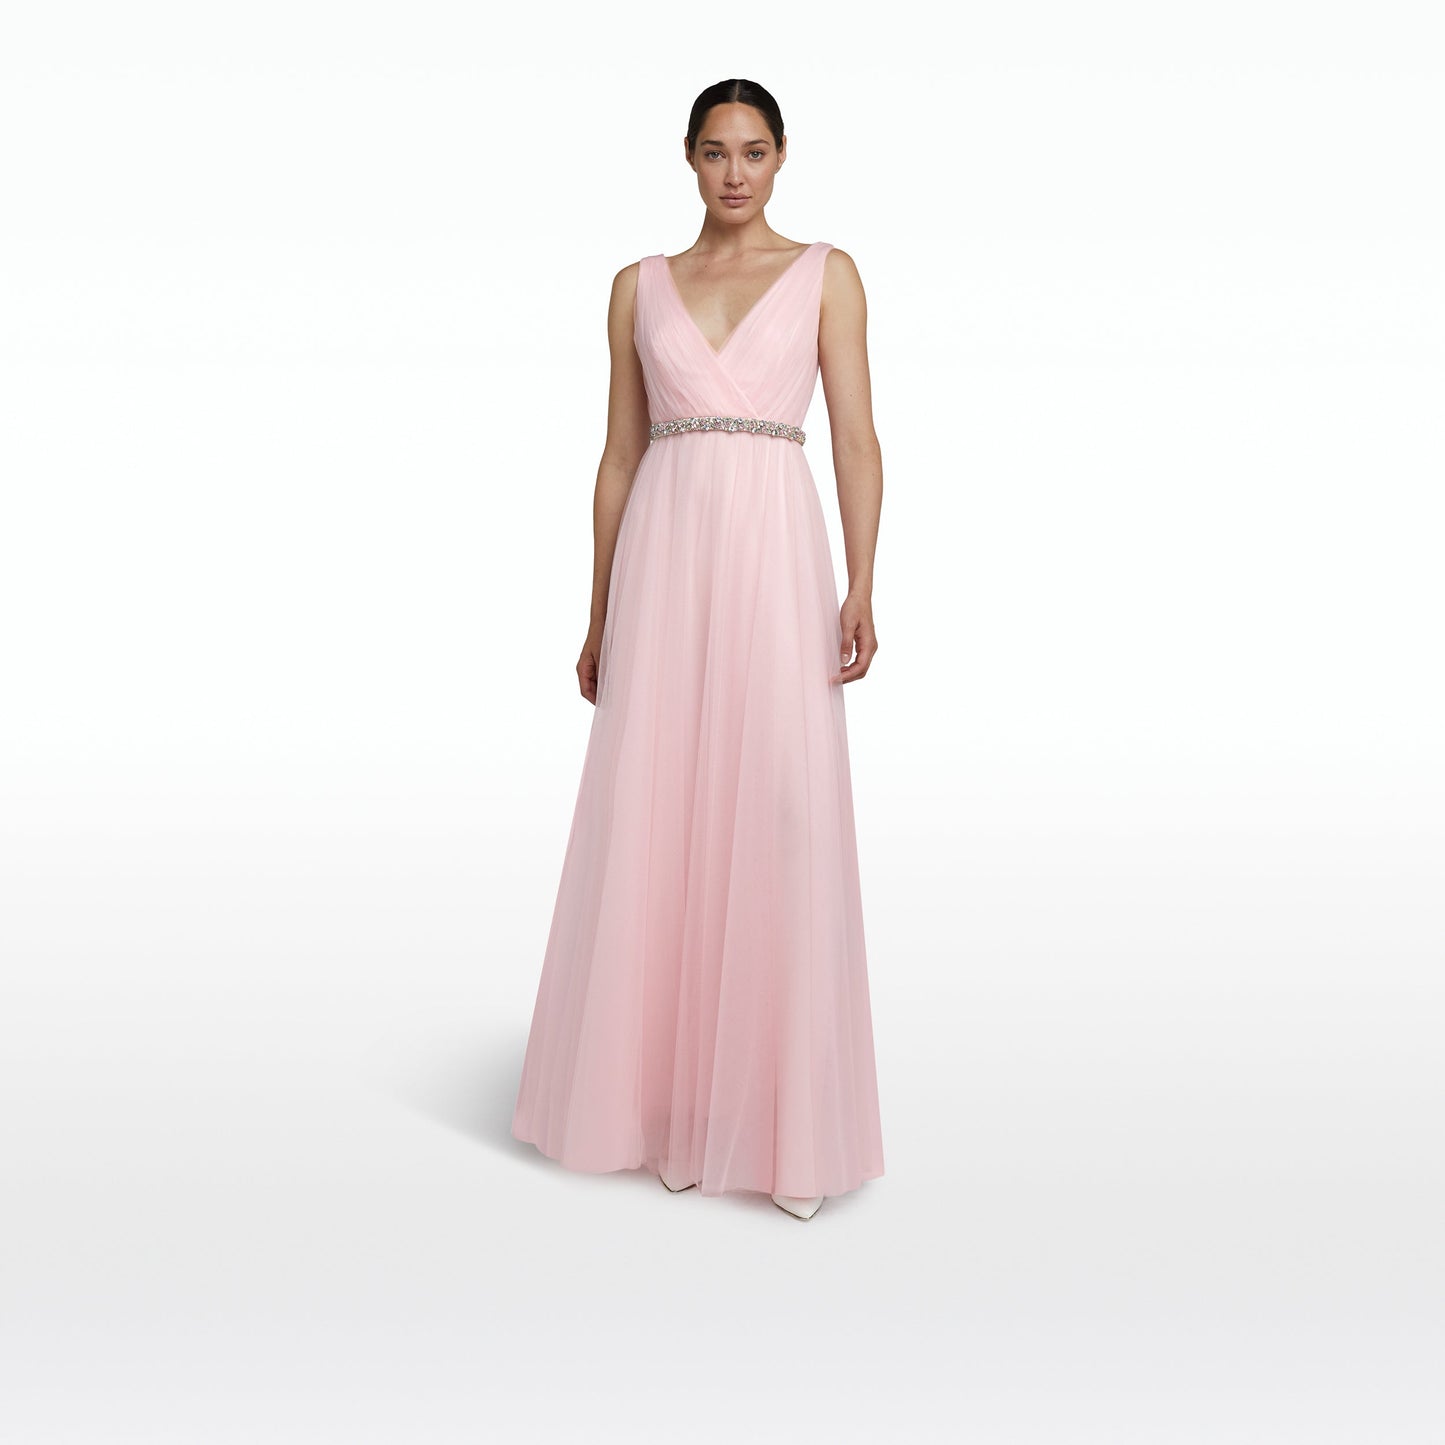 Enrica Barely Pink Long Dress With embroidered Belt